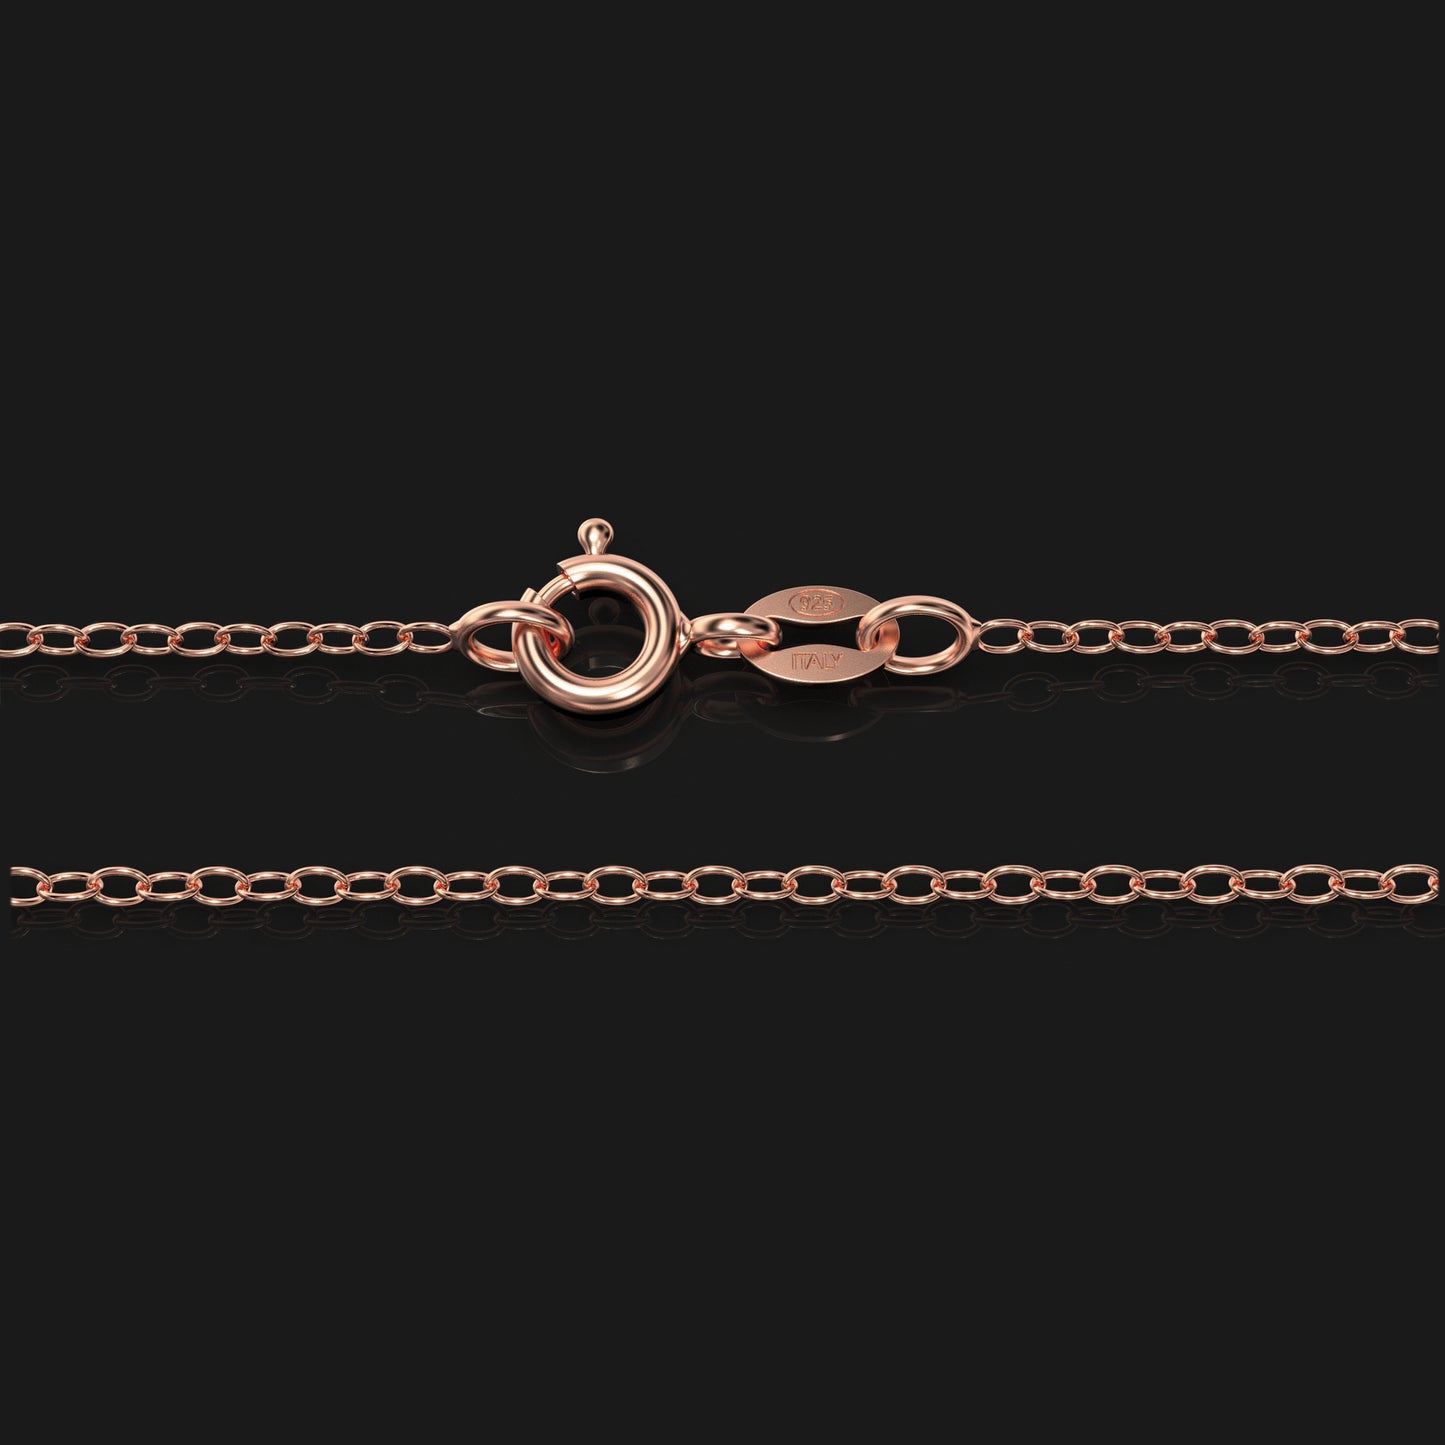 18K Rose Gold over Sterling Silver 1.2mm Italian Cable Chain Necklace | 14"-36"